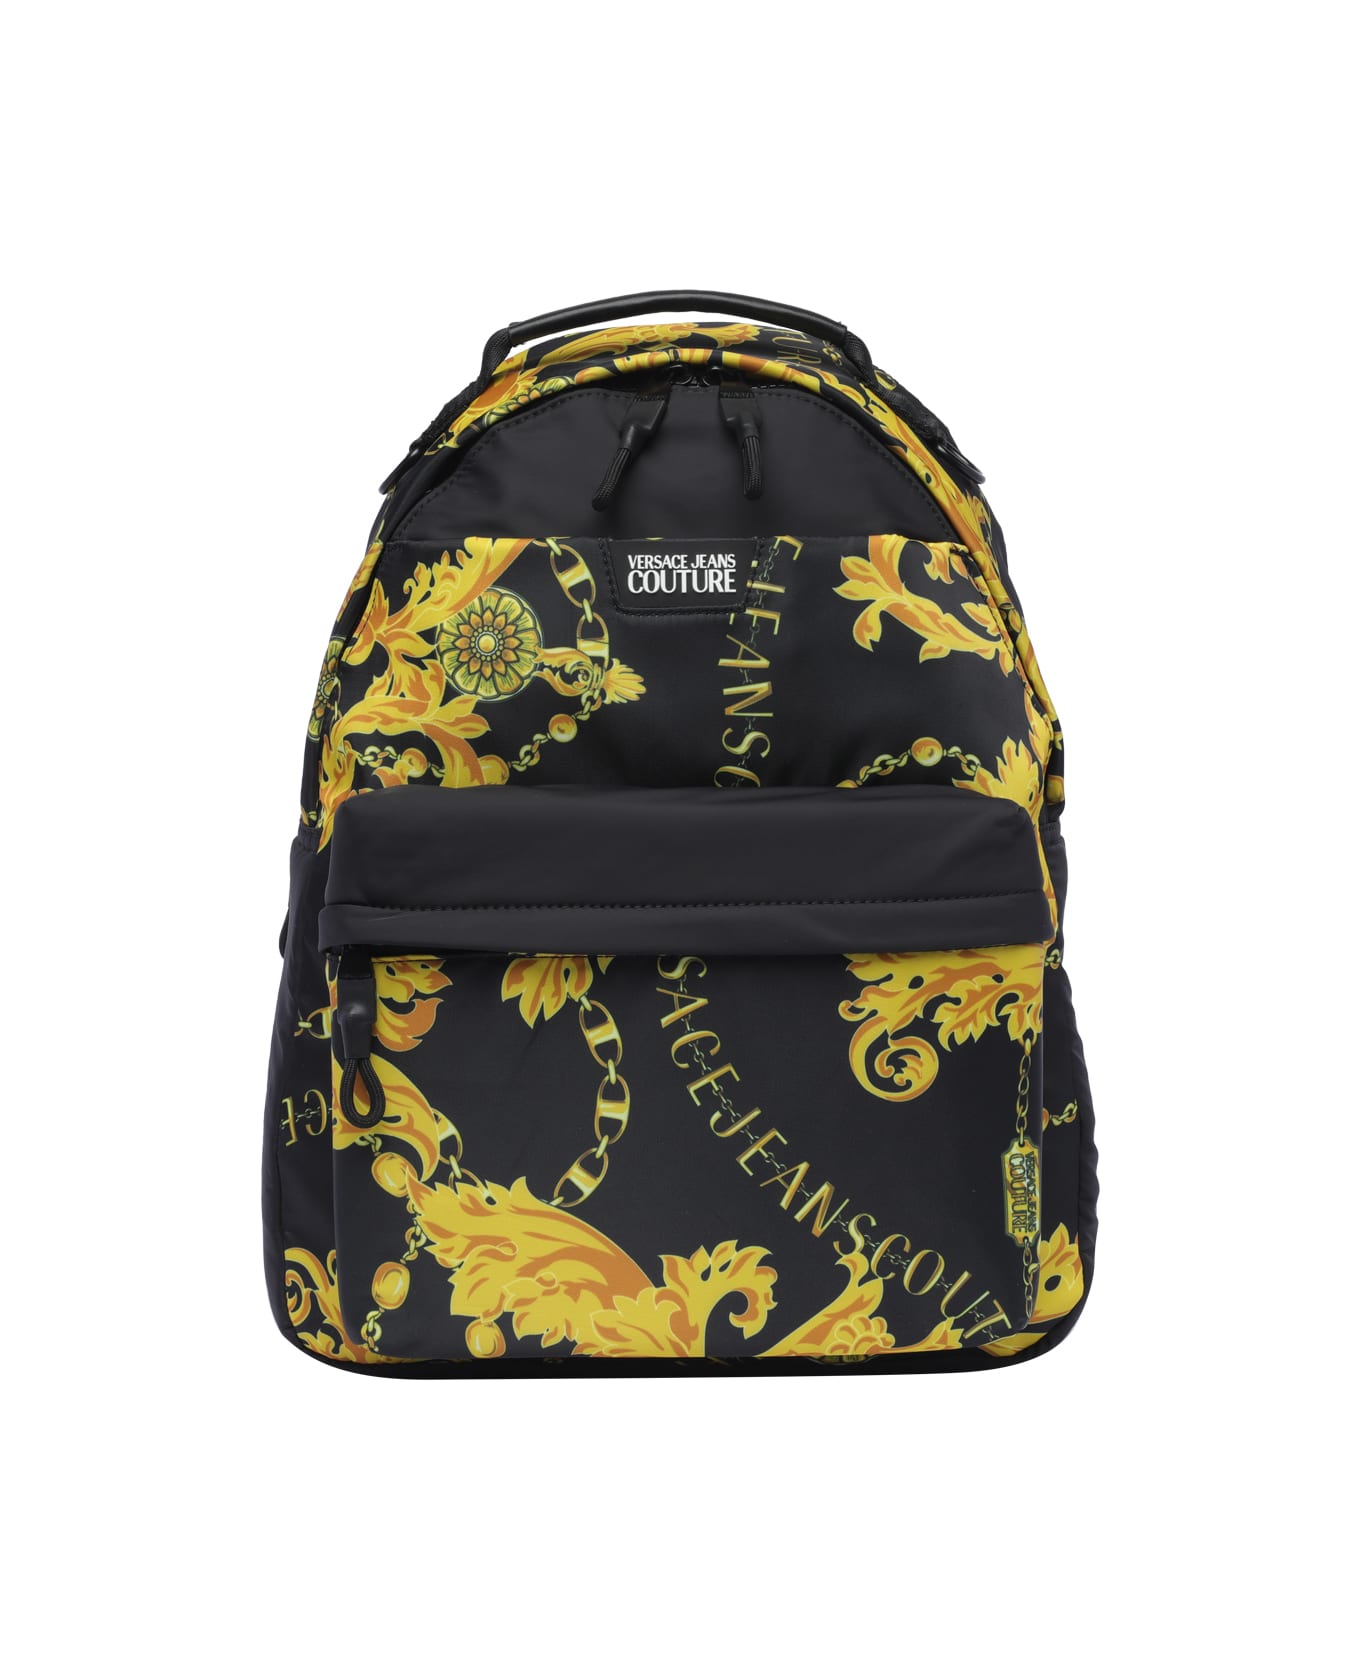 Versace Jeans Couture Chain Couture Nylon Print Backpack - Black Gold